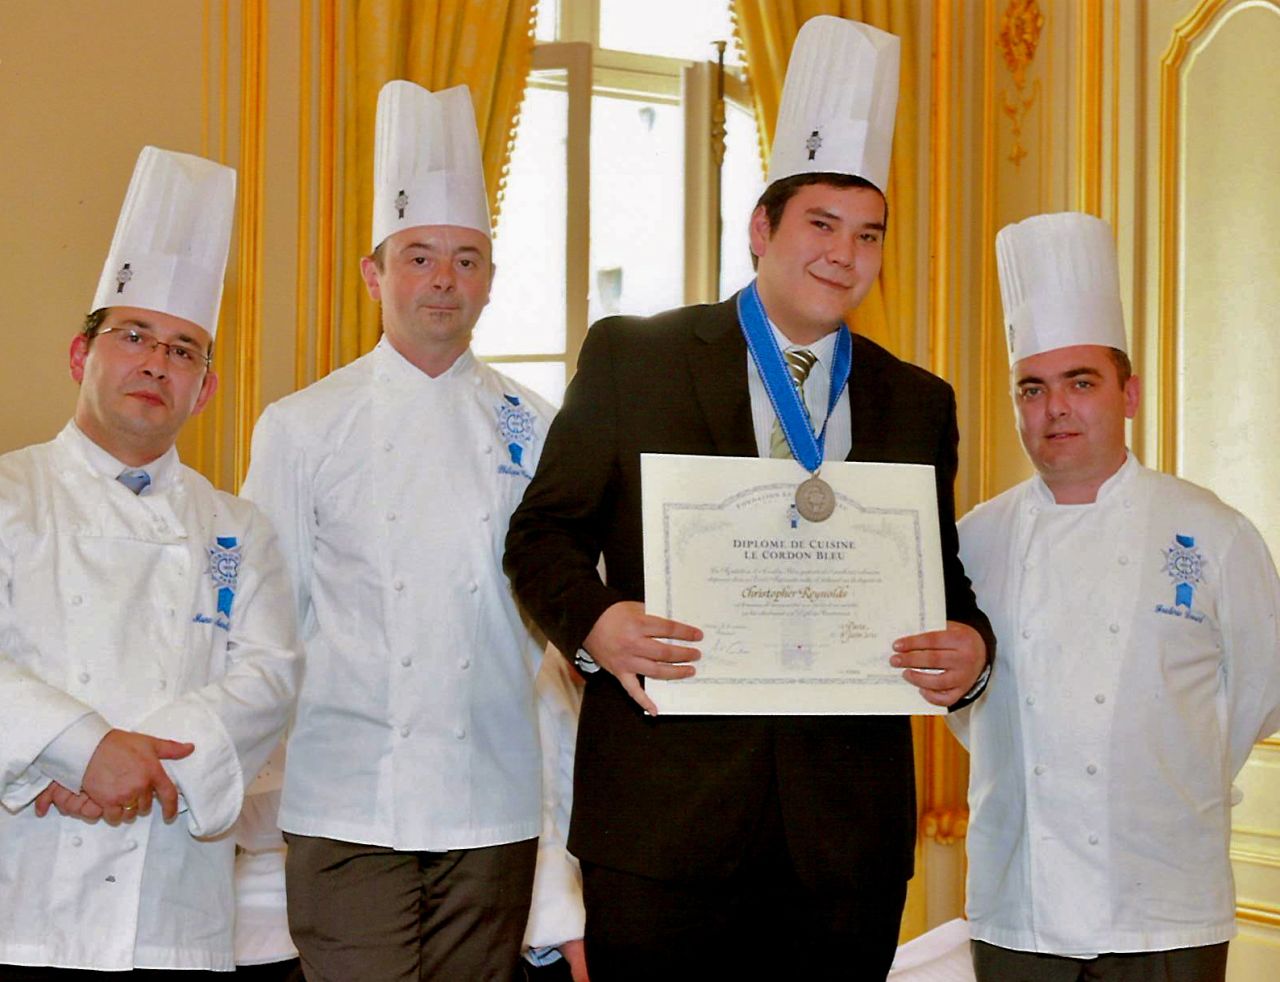 Reynolds graduated from Le Cordon Bleu in Paris in 2012.